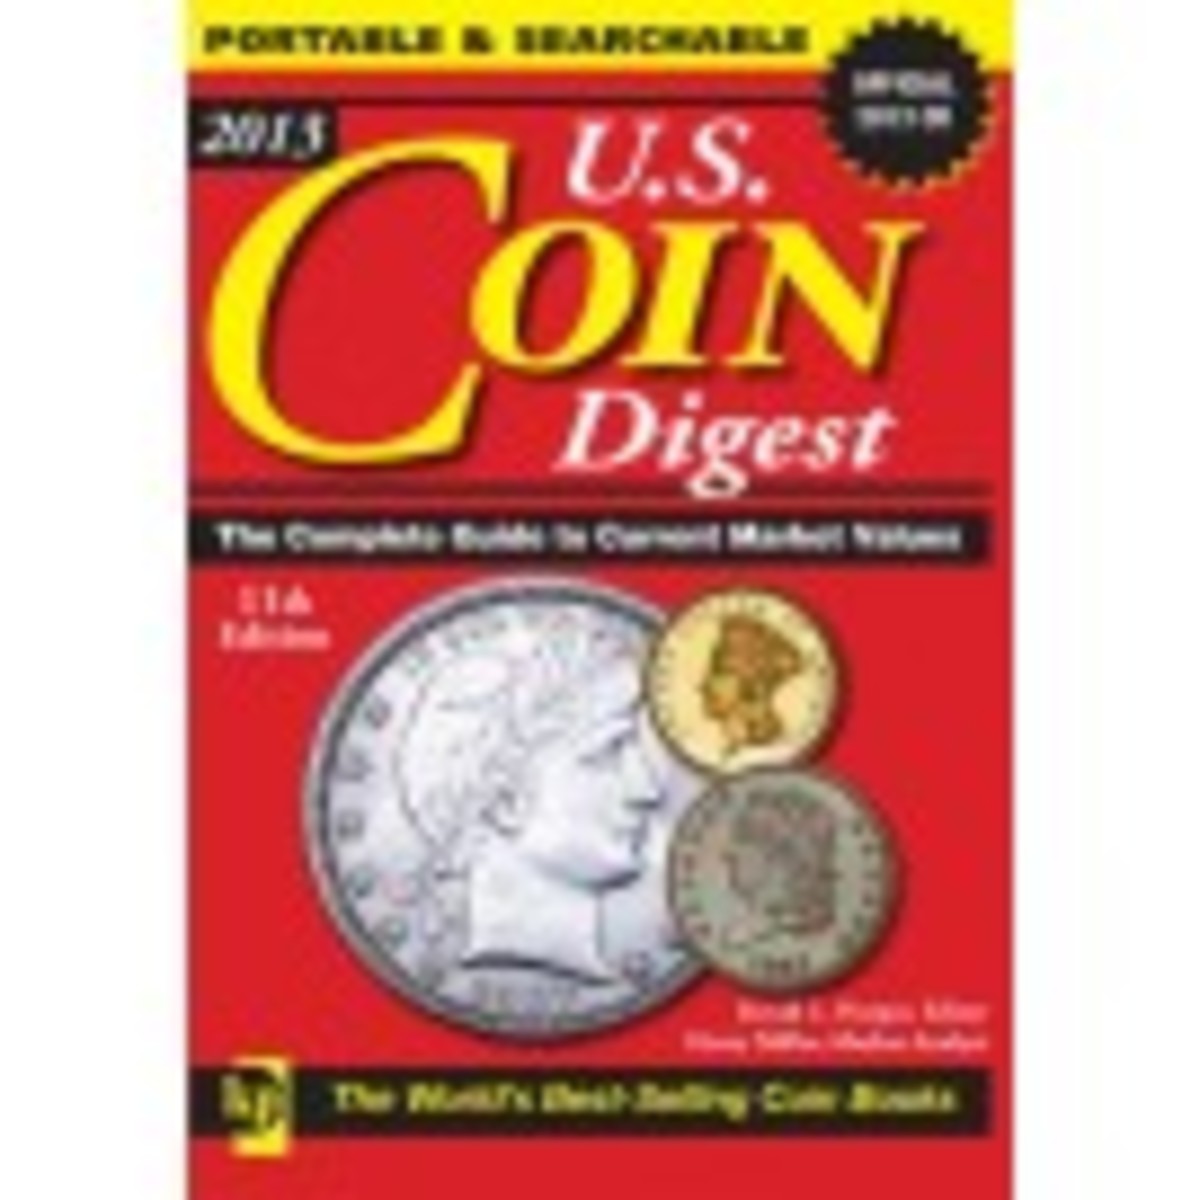 2013 U.S. Coin Digest, 11th Edition CD